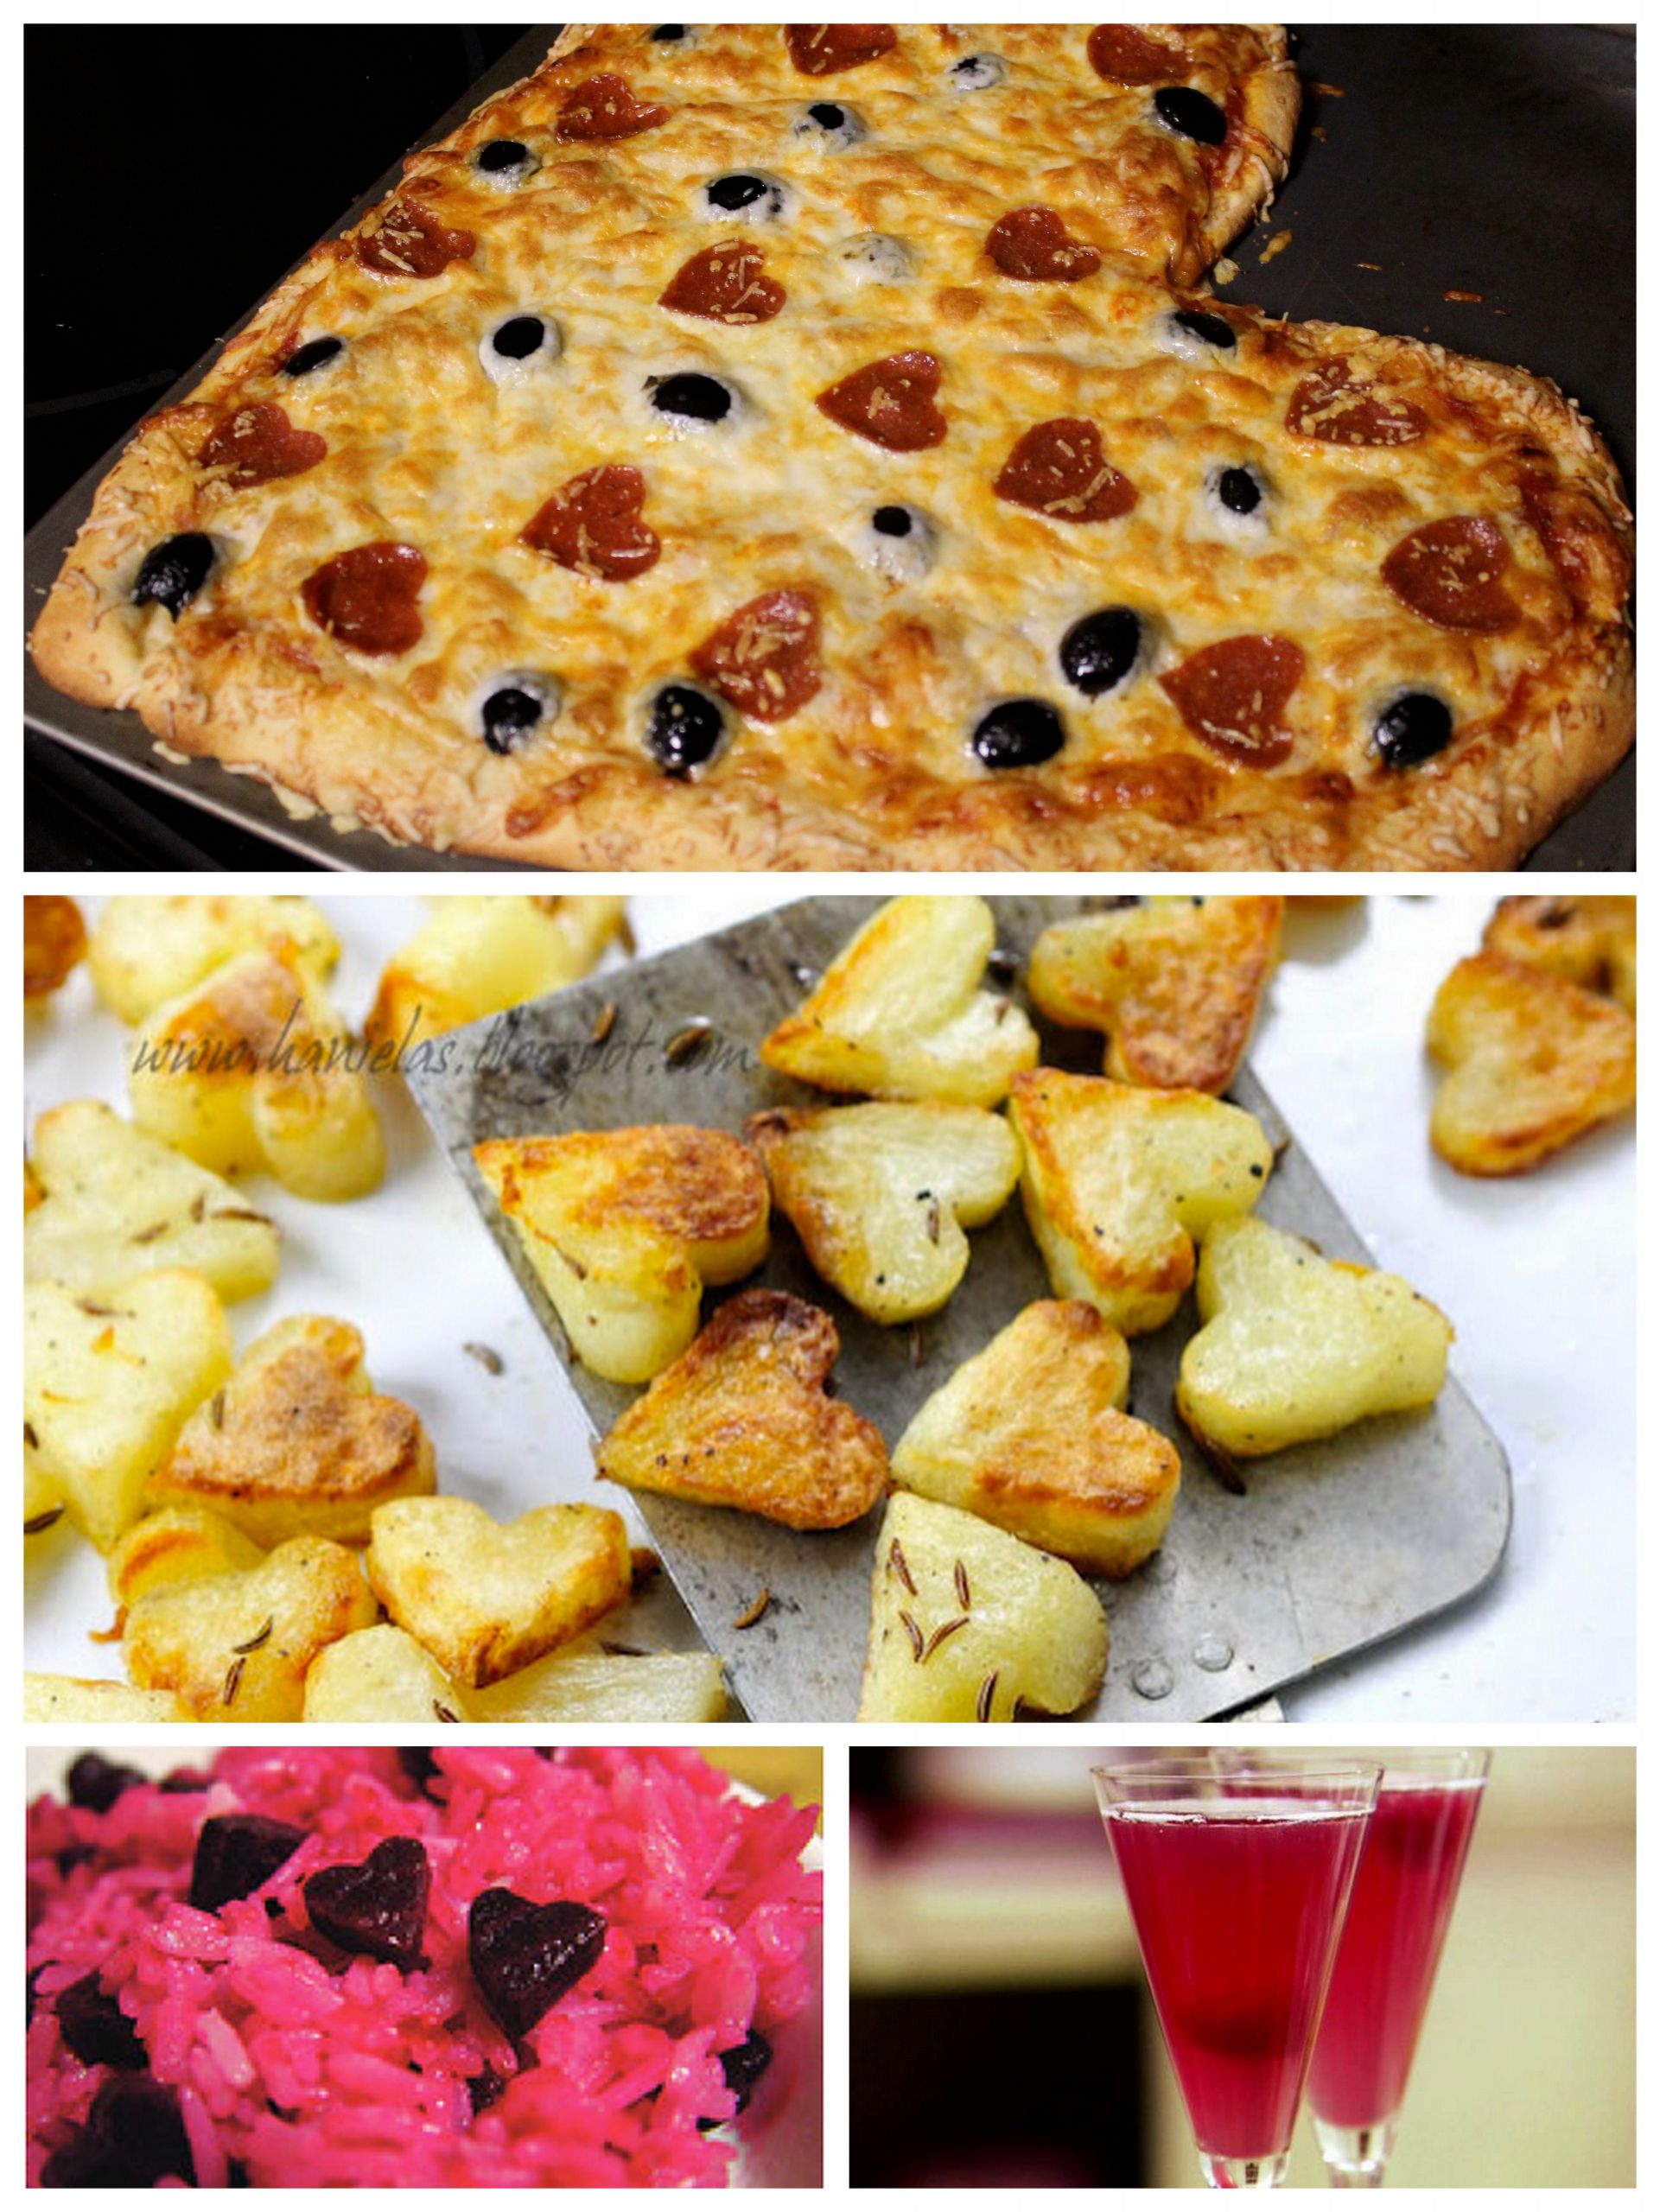 Valentines Day Food Ideas Awesome Valentine’s Day Food Ideas